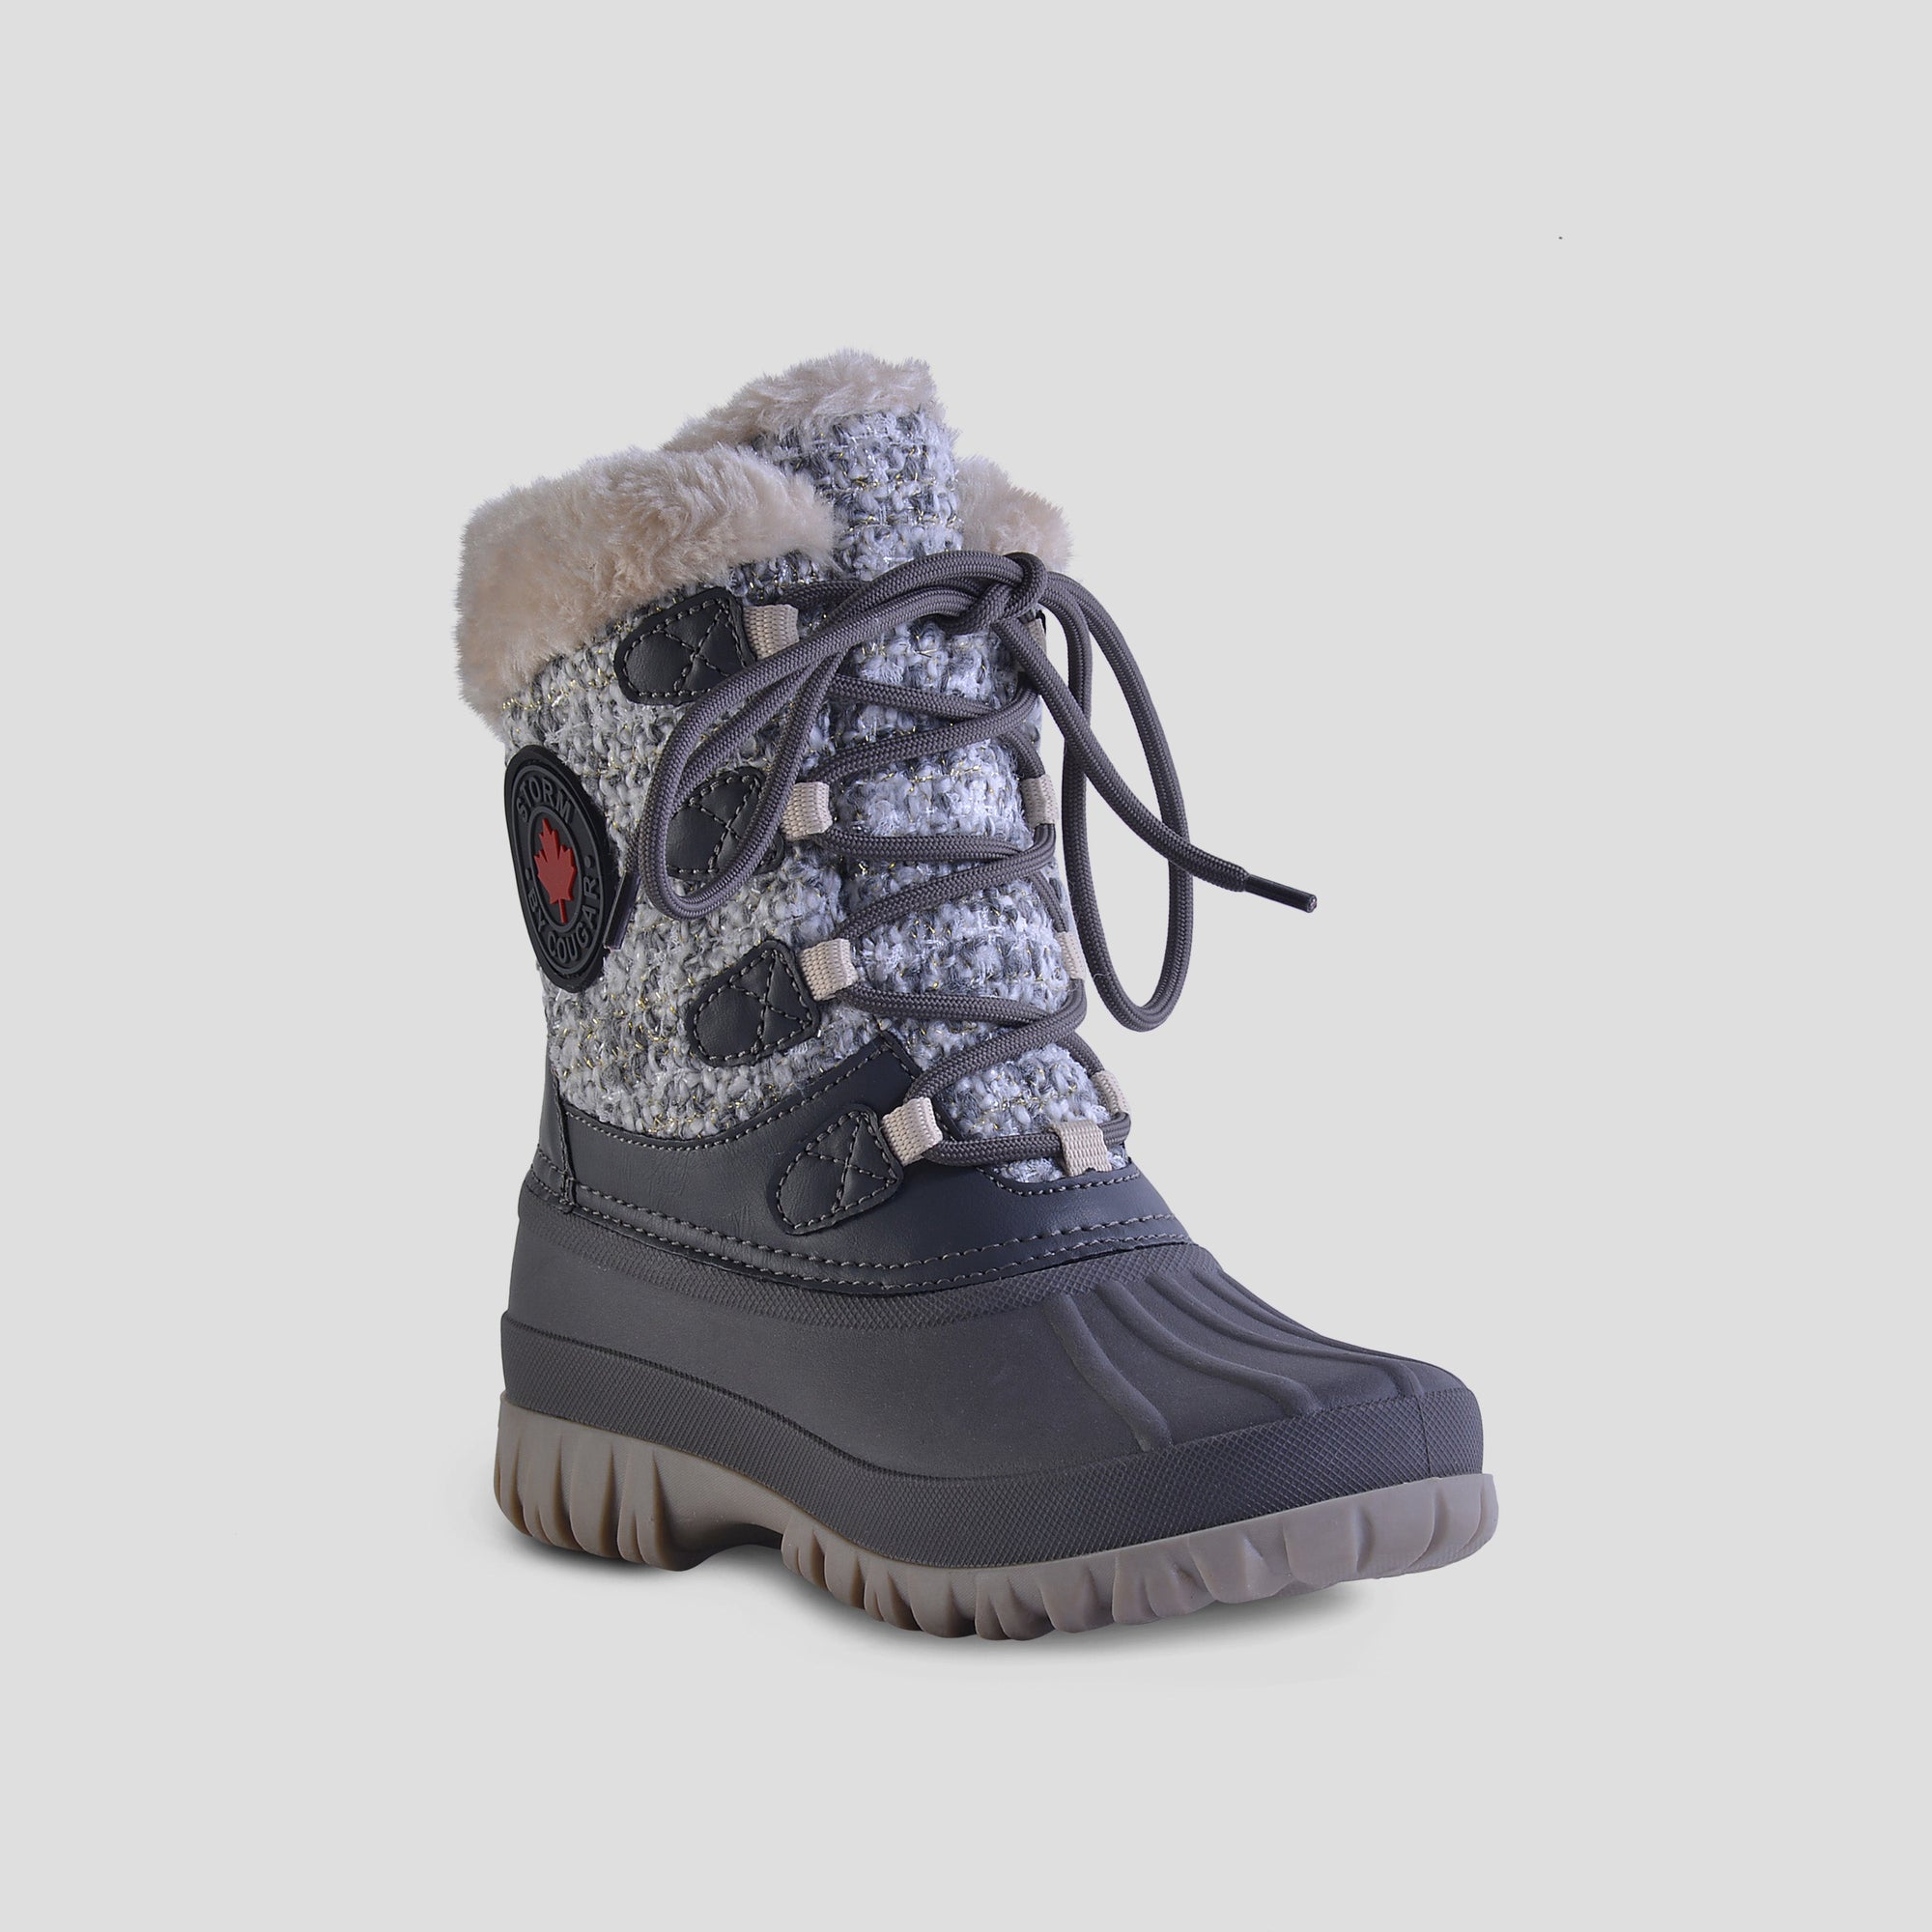 Cabin Soft Textured Textile Winter Boot - Color Charcoal Multi